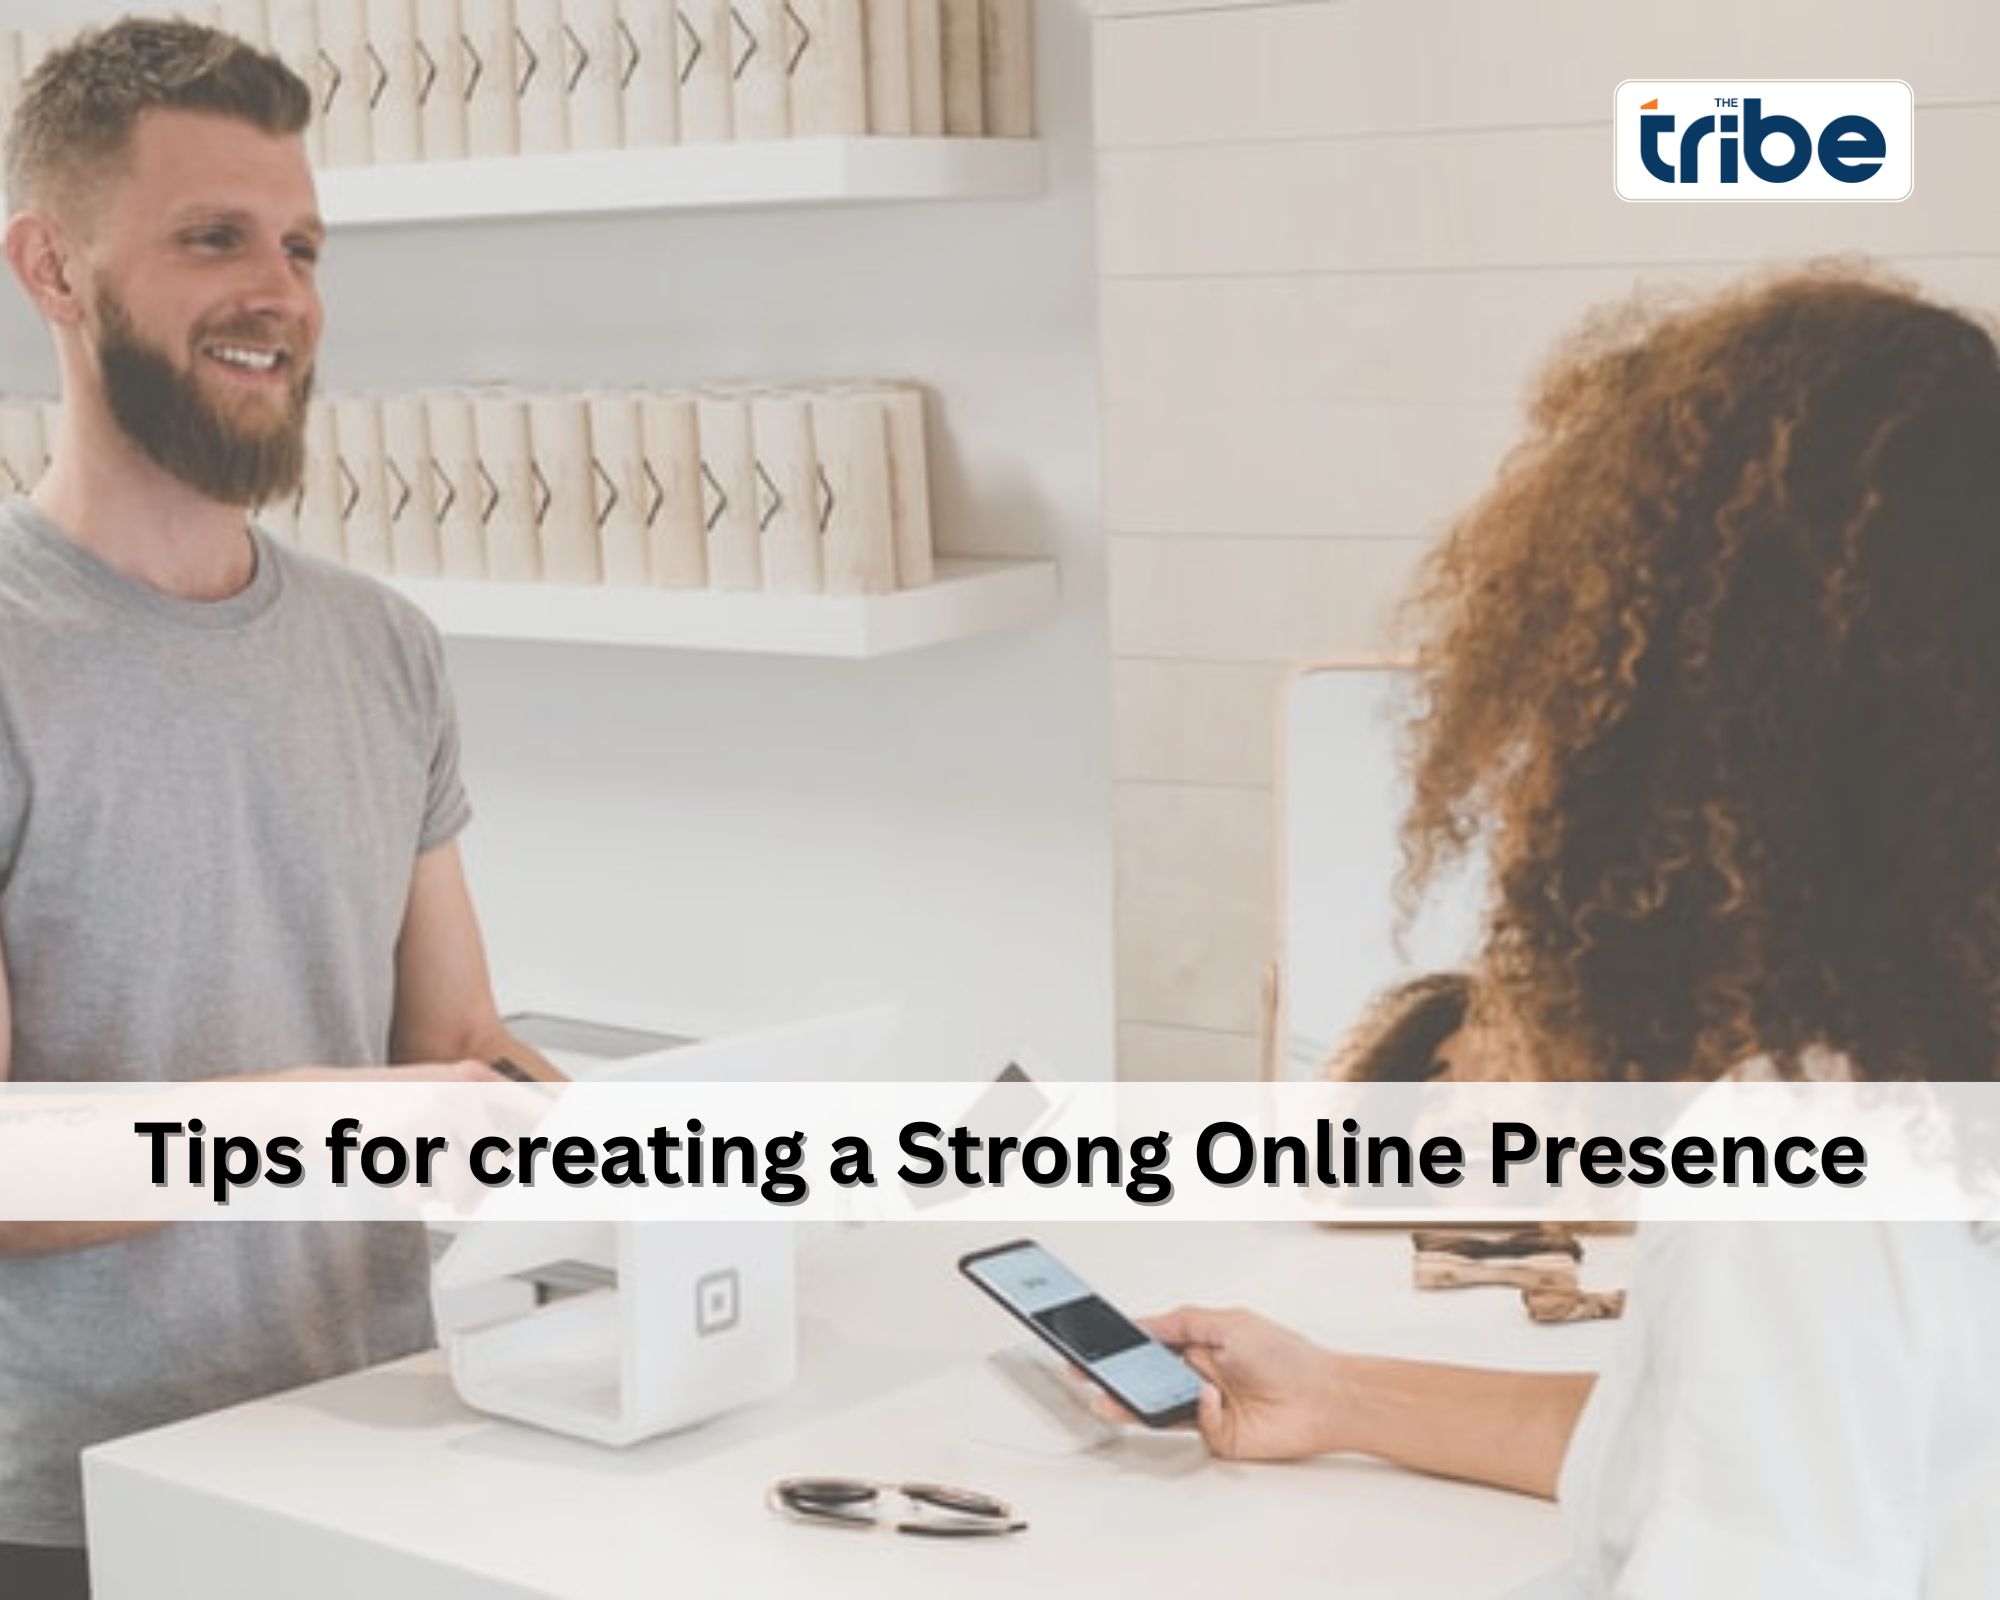 How to create a strong online presence for your business